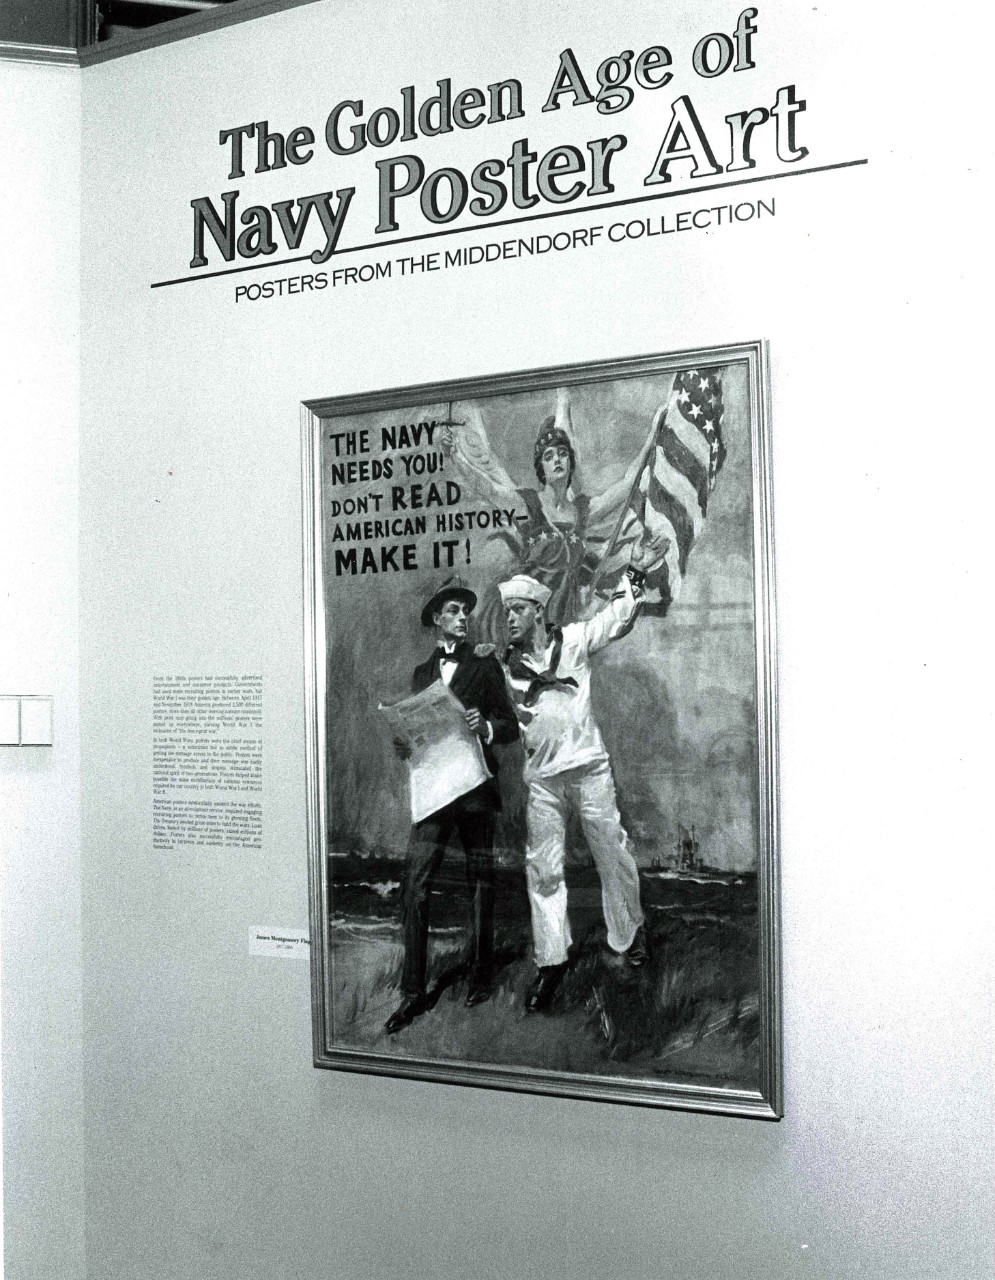 NMUSN-4390:  The Golden Age of Navy Art Posters, 1988-1989.    Temporary display area housing the exhibit.   National Museum of the U.S. Navy Photograph Collection.   